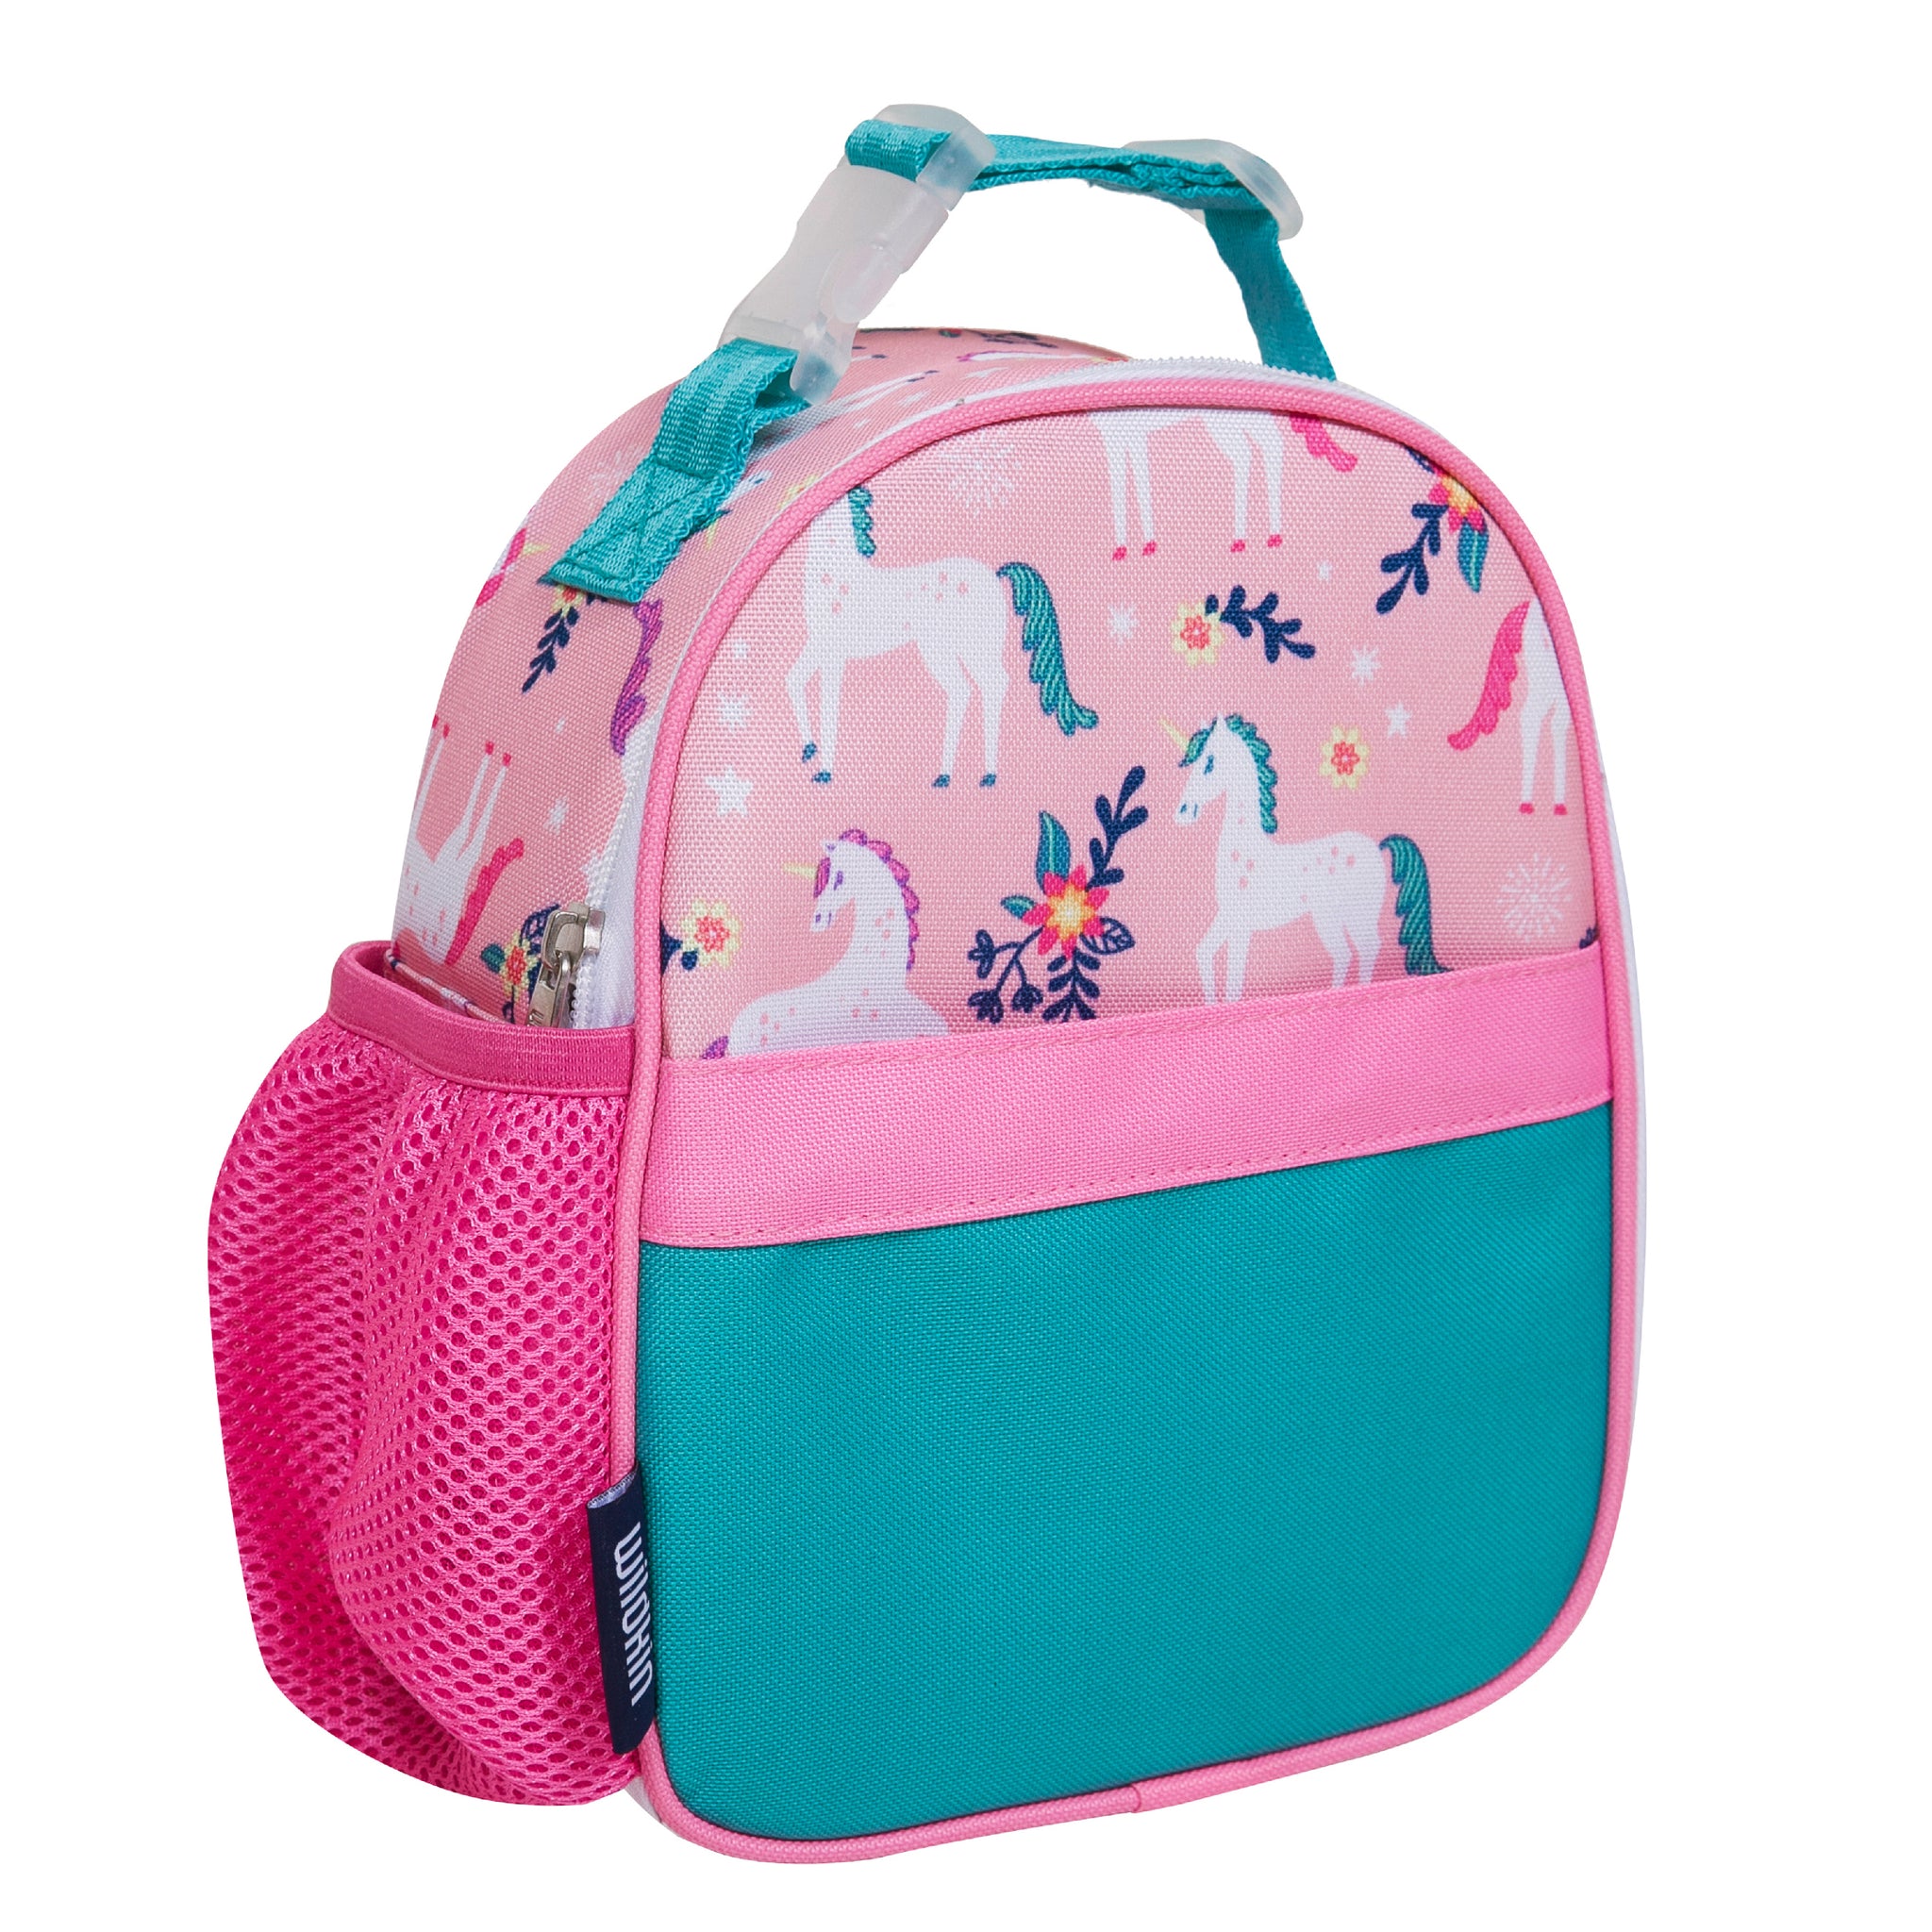 Kids Lunch Boxes, Unicorn Pack Lunchbox